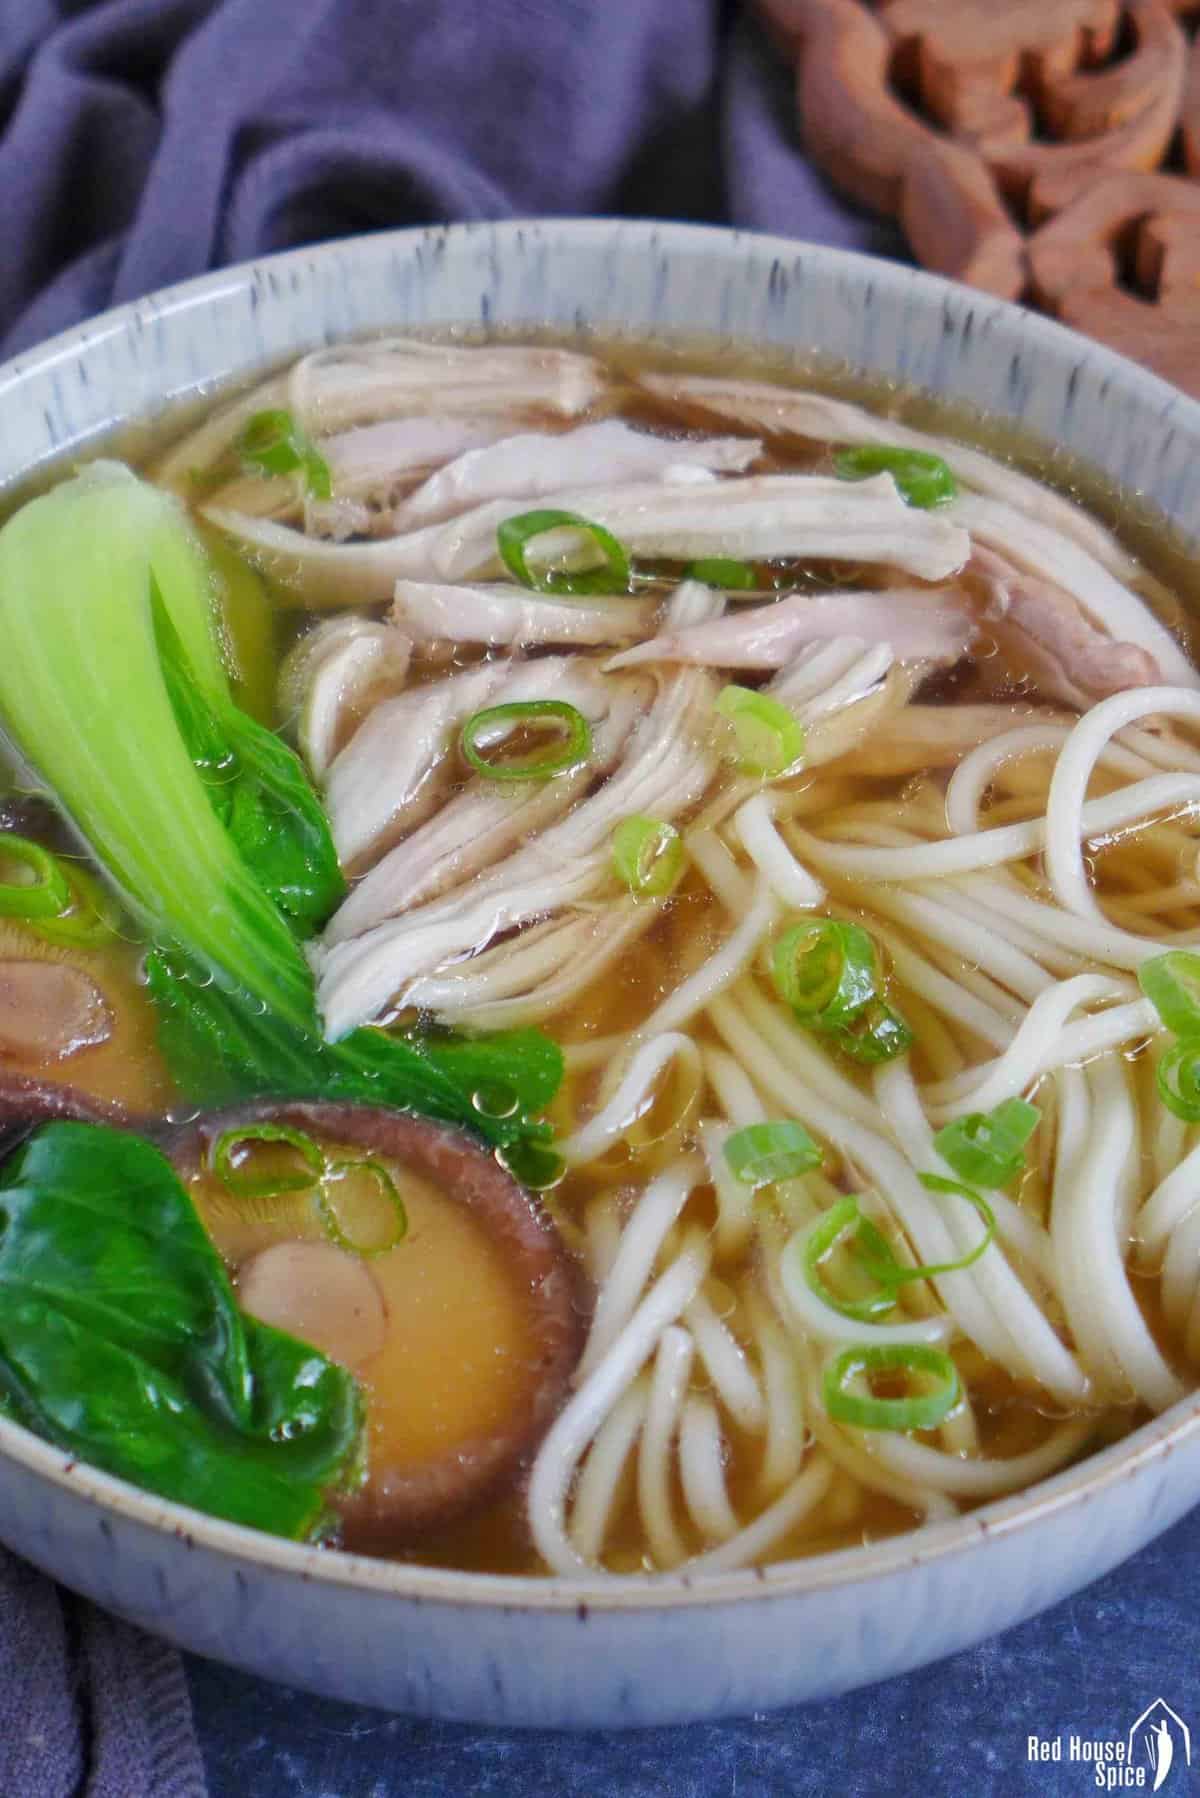 shredded chicken, noodles, mushroom and Bok Choy in soup.